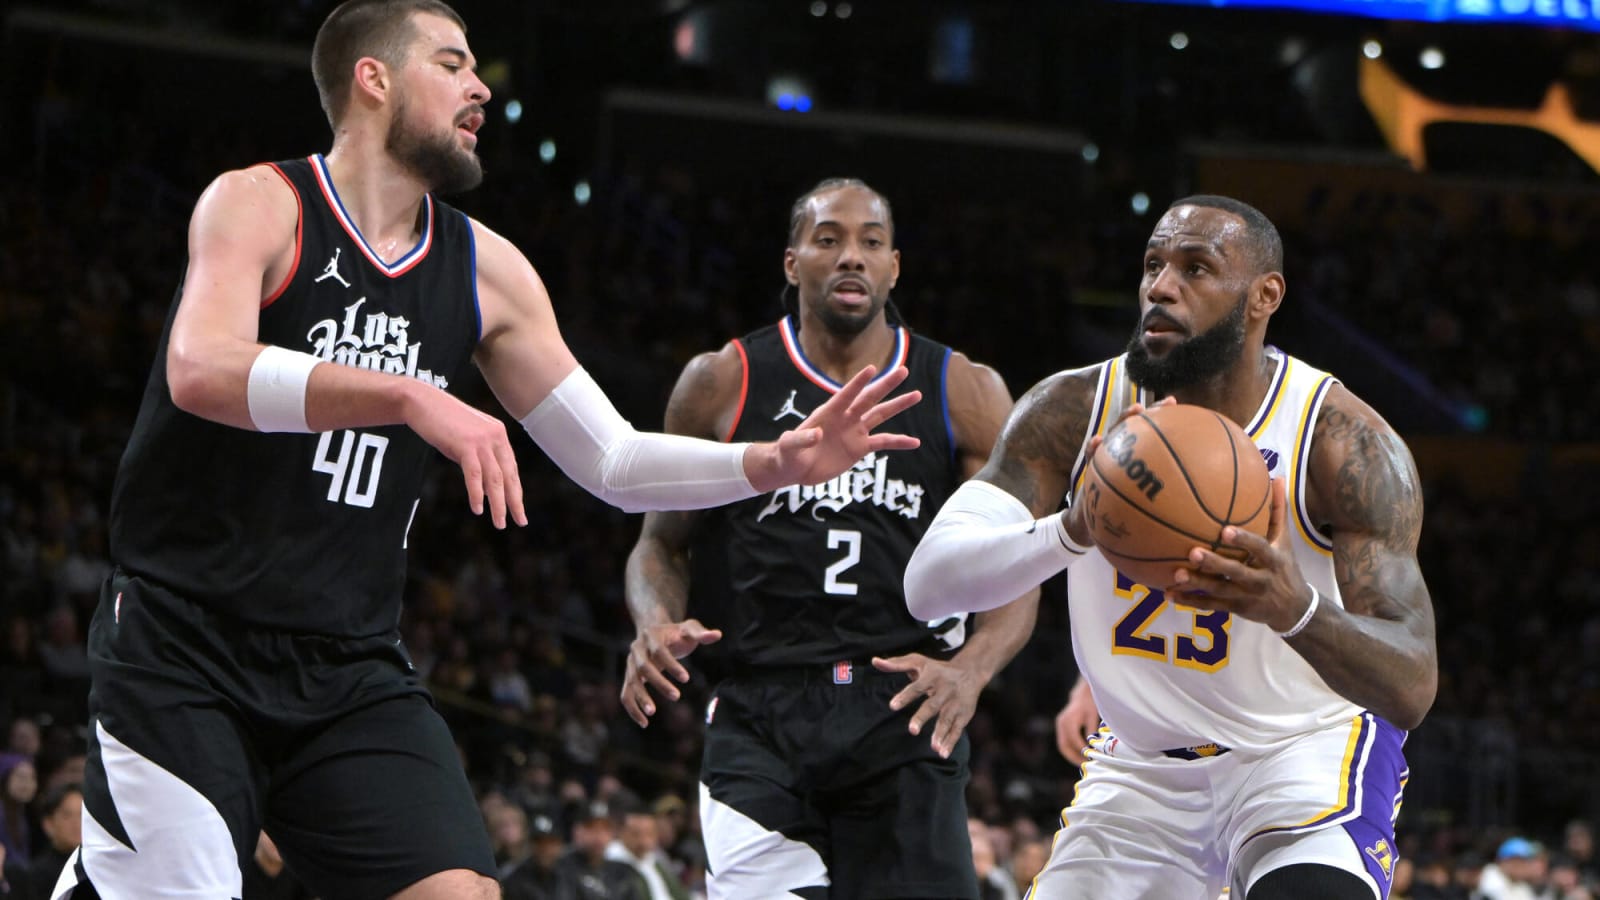 LeBron James: Lakers must get something out of close win over Clippers